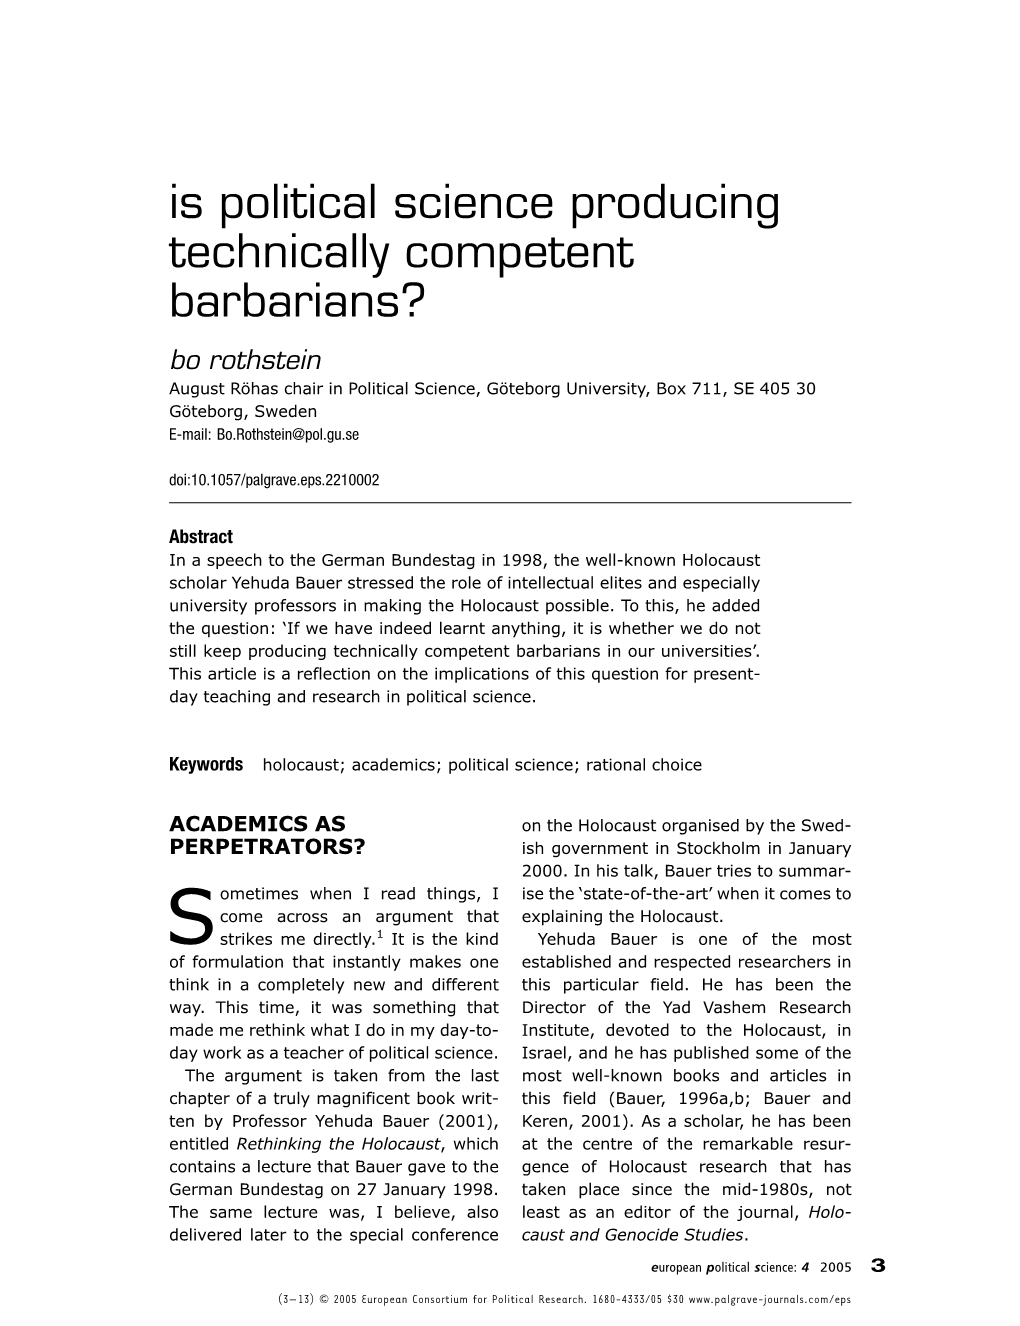 Is Political Science Producing Technically Competent Barbarians?